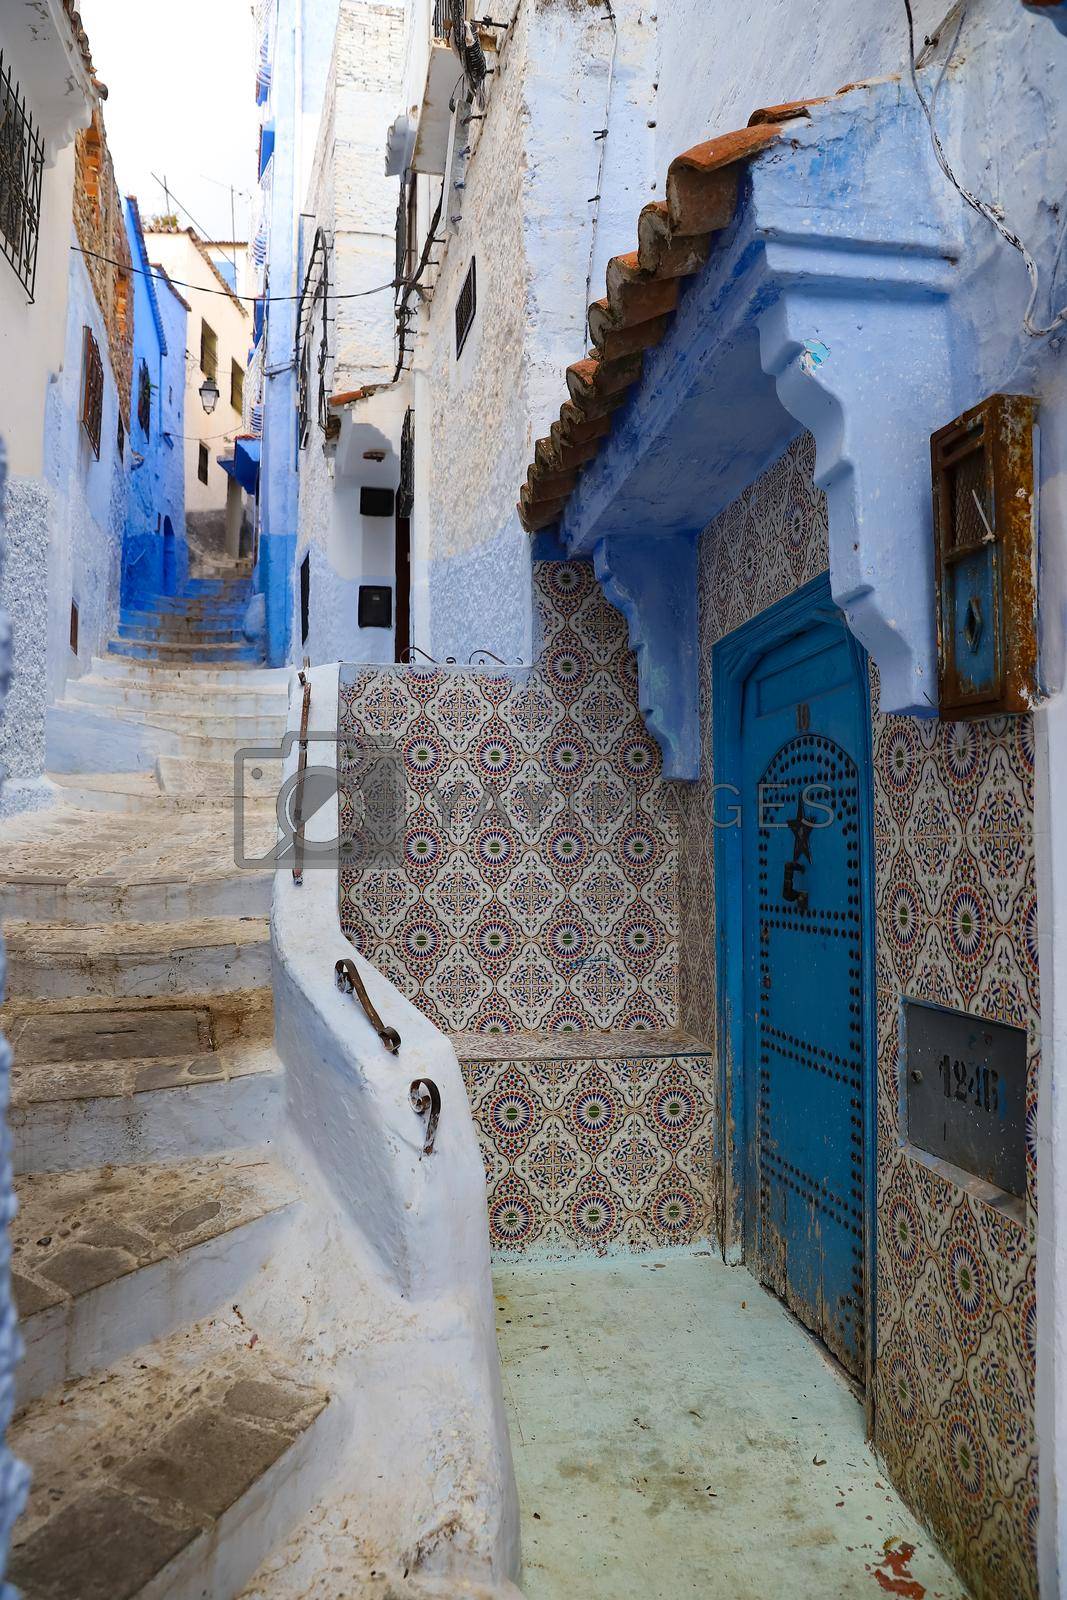 Royalty free image of Street in Chefchaouen, Morocco by EvrenKalinbacak